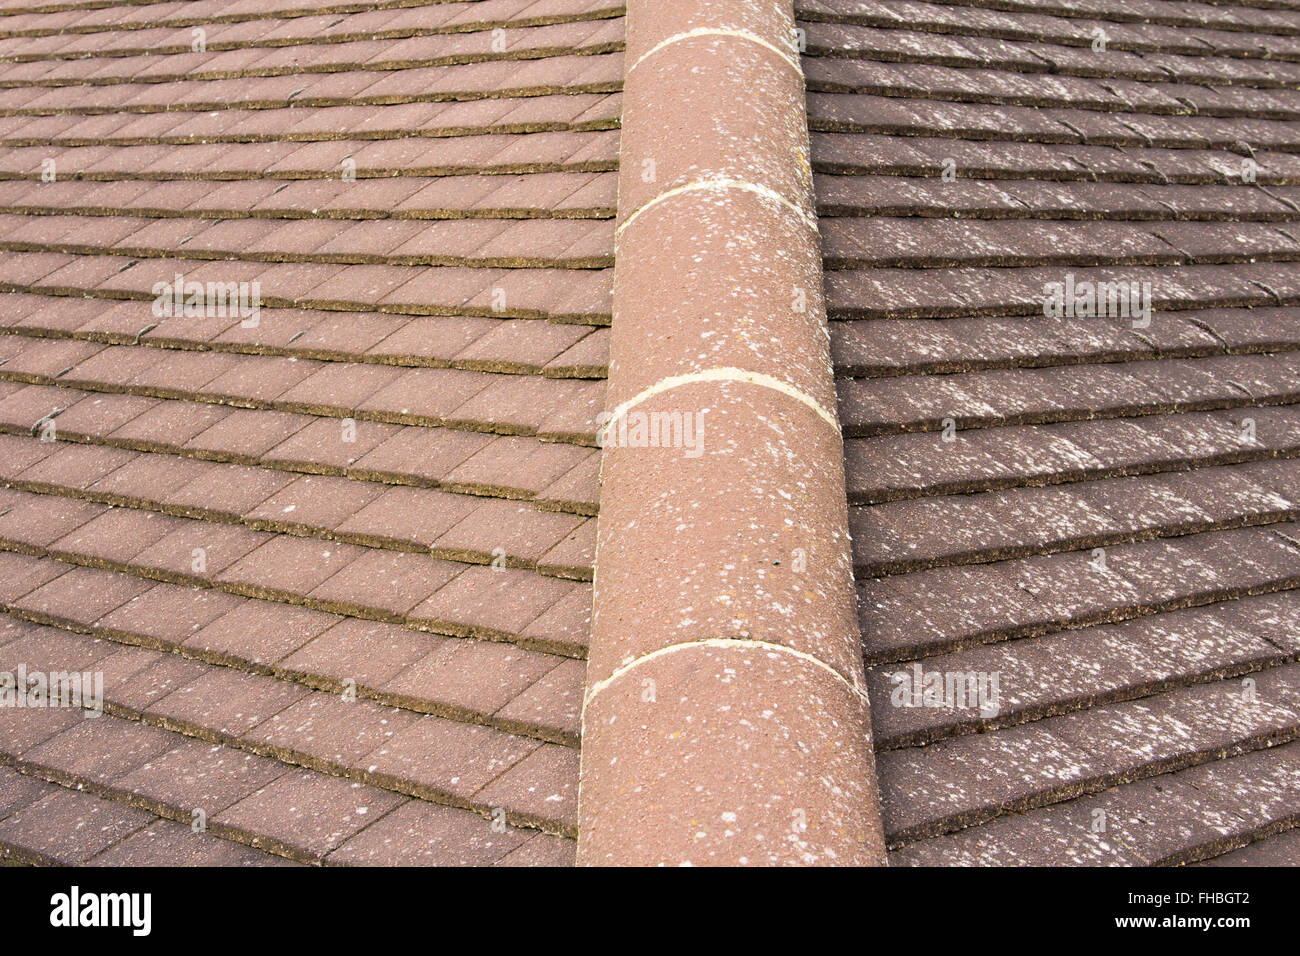 Semi circular hip ridge tiles on a hip roof on a house in the UK. Stock Photo